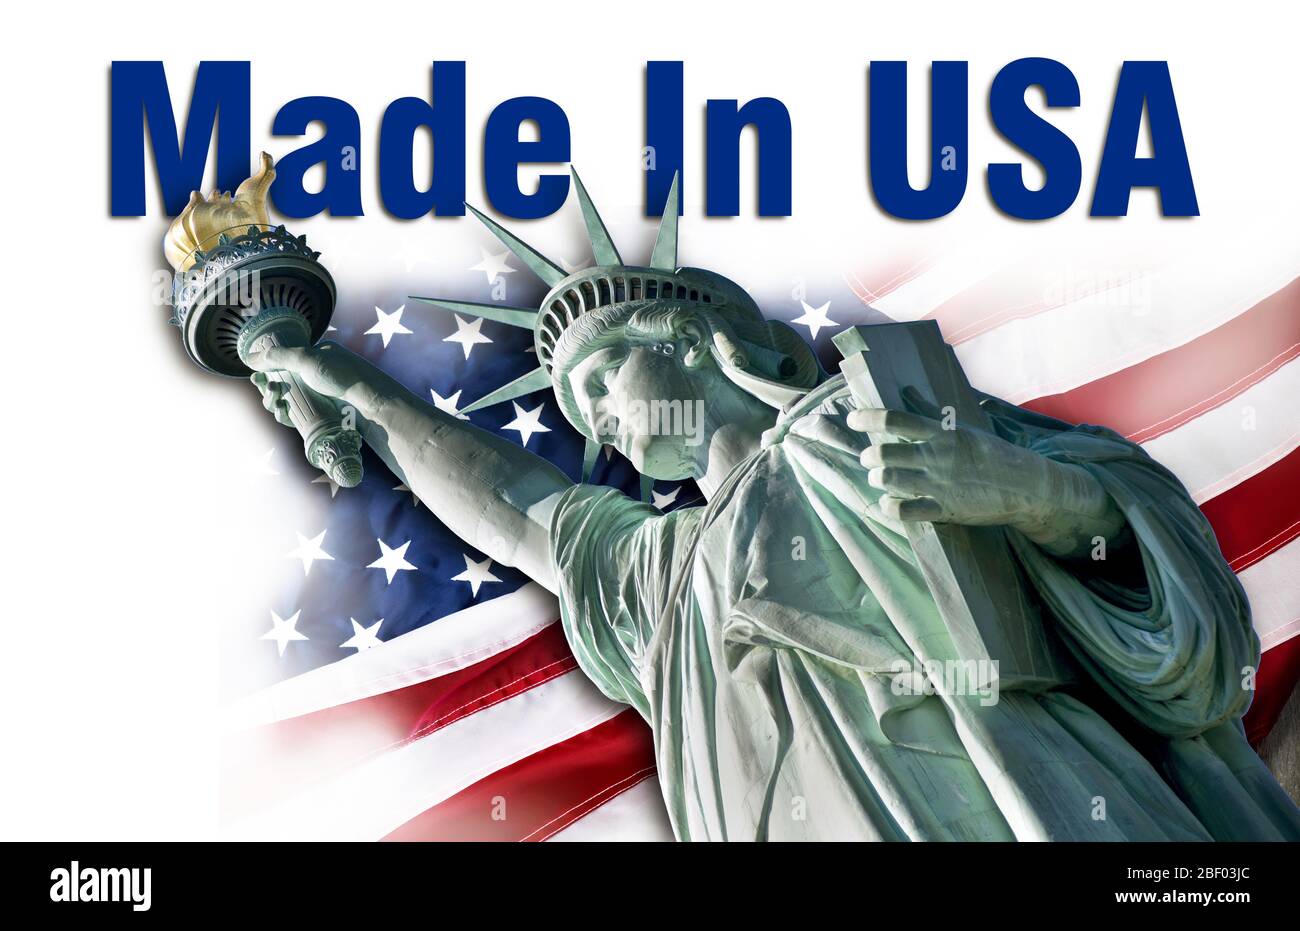 Made in USA with Statue of Liberty in NYC. Stock Photo